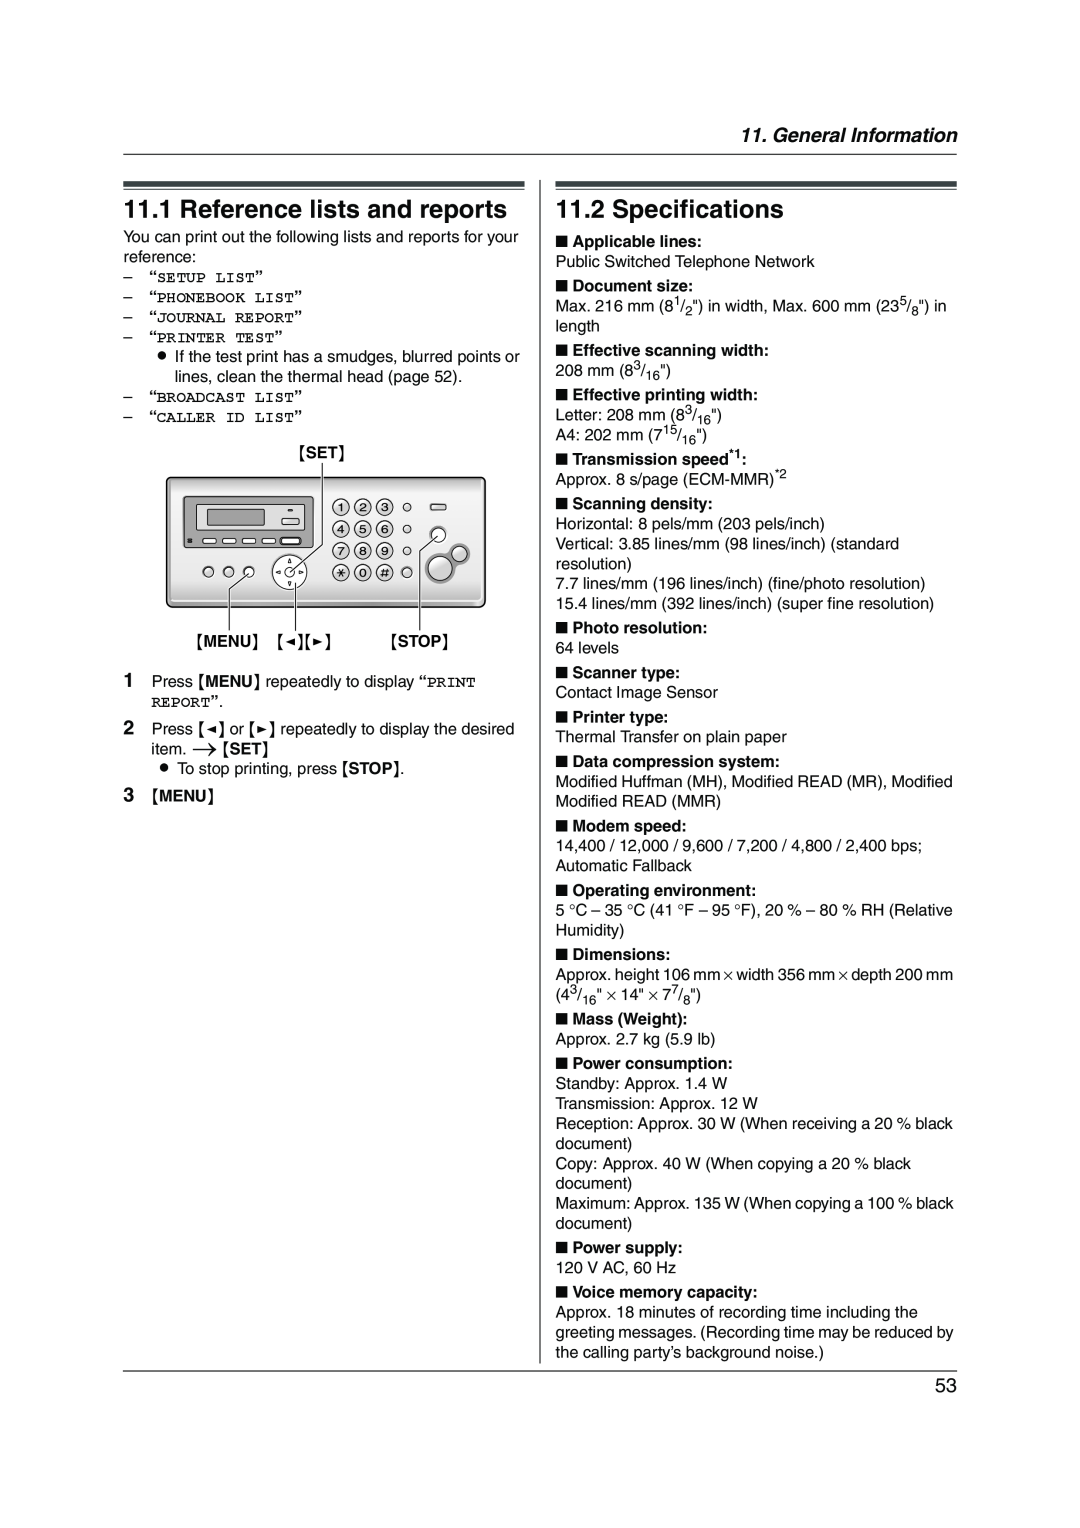 Panasonic KX-FP215 operating instructions Reference lists and reports, Specifications, General Information 